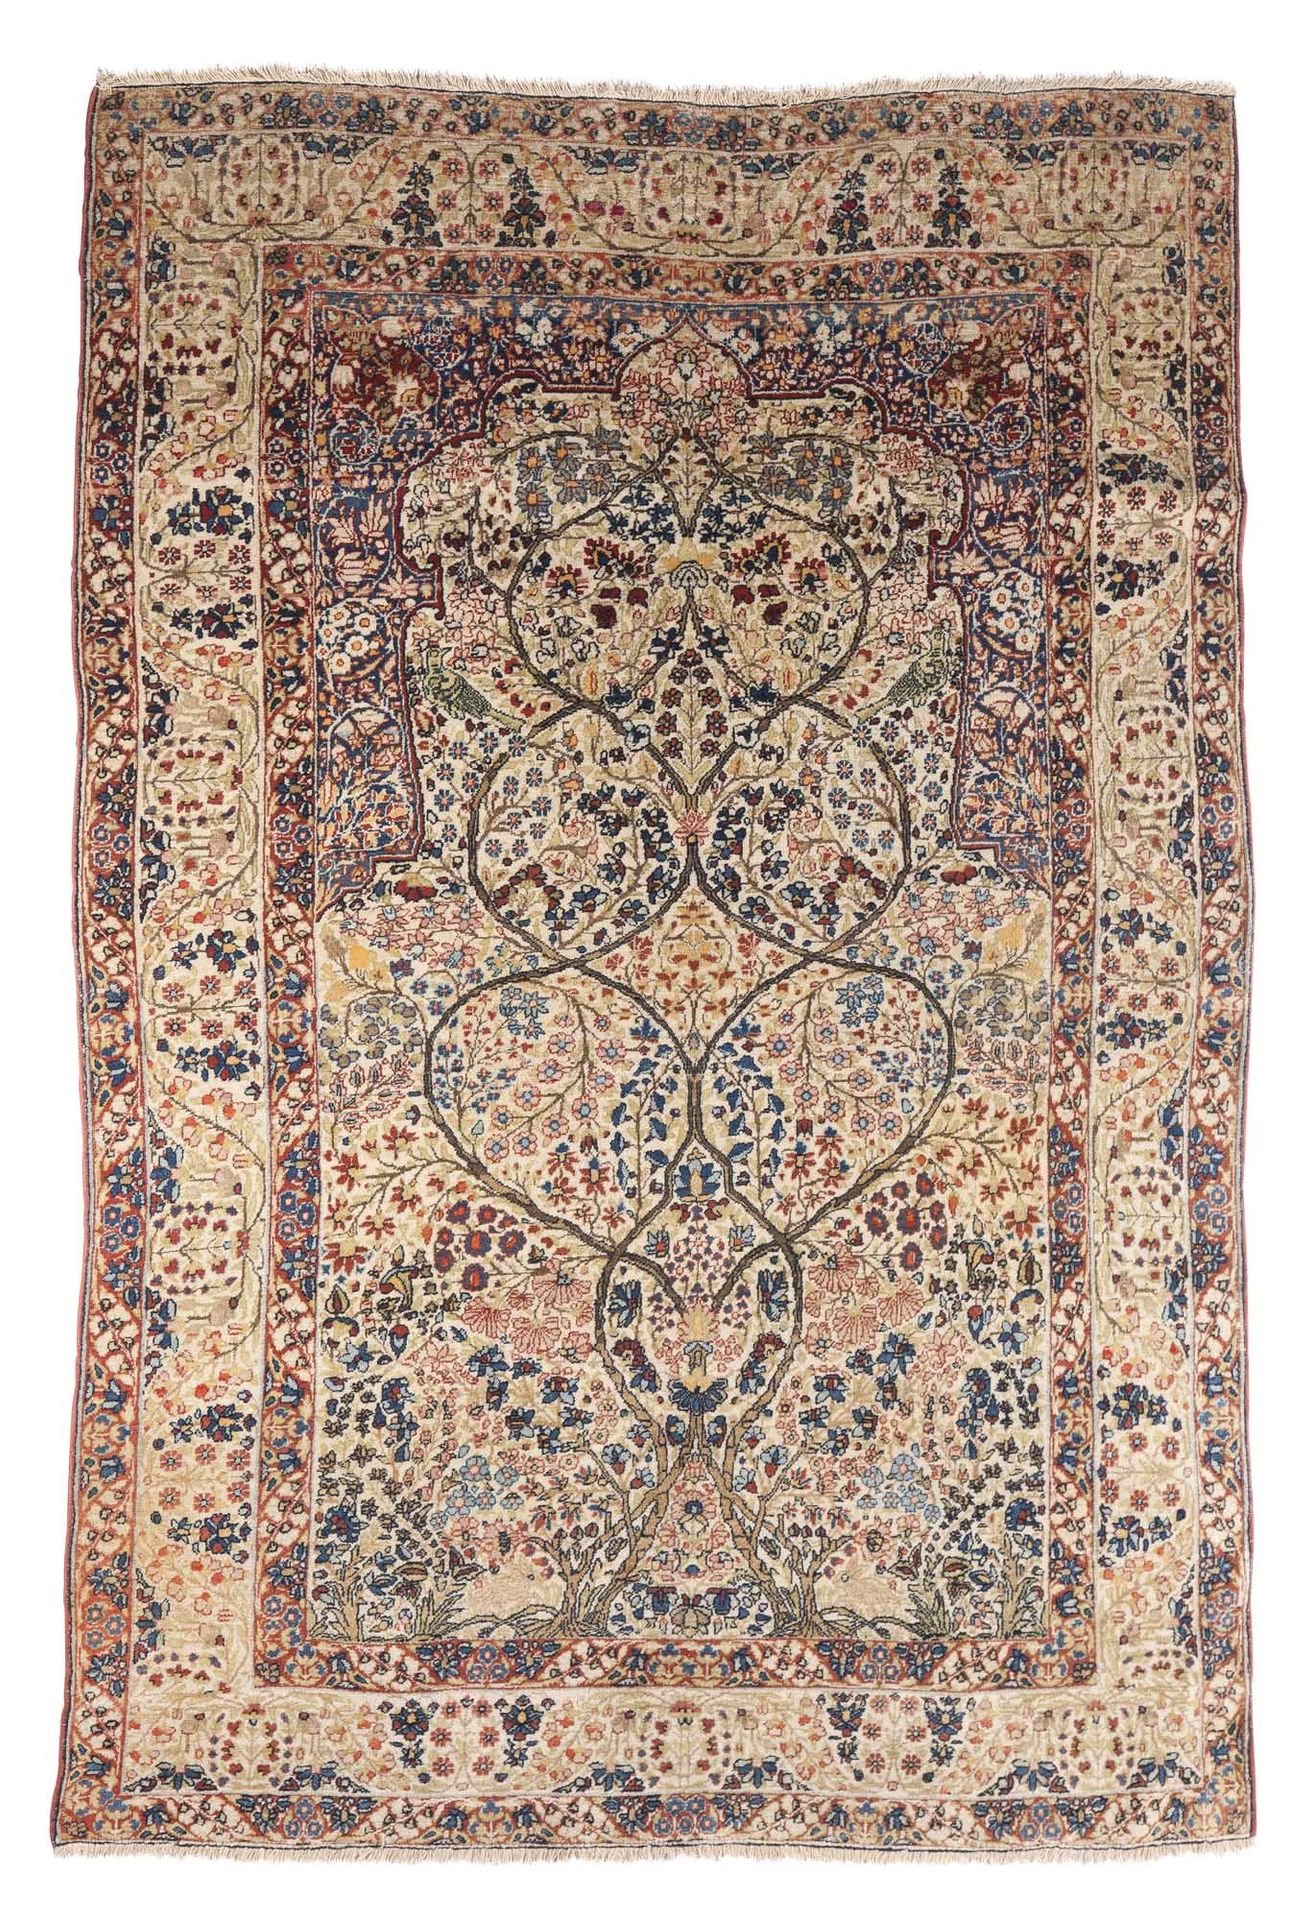 Null Carpet KIRMAN (Persia) end of the 19th century

Dimensions : 206 x 134cm

T&hellip;